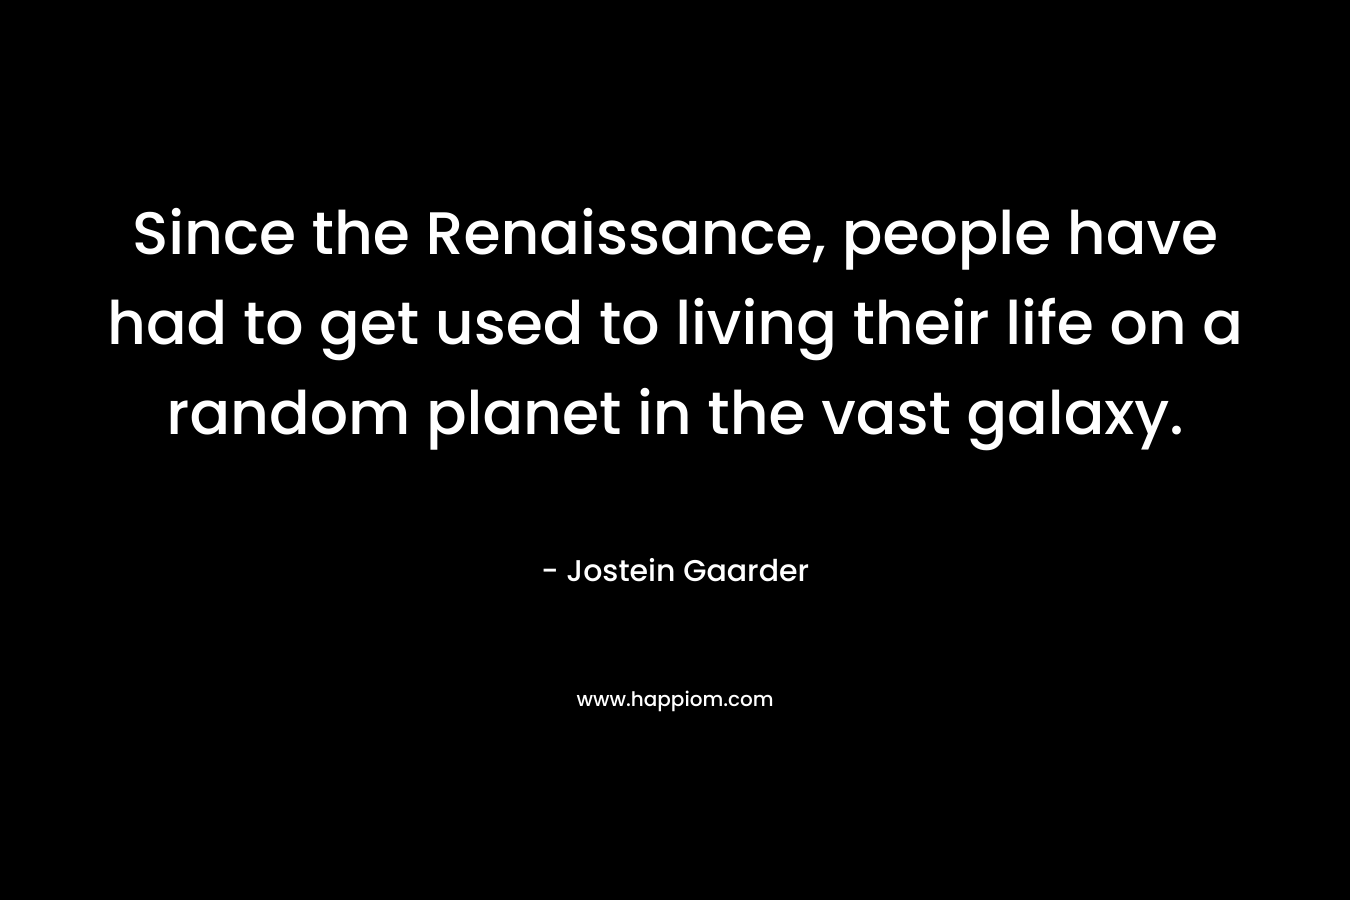 Since the Renaissance, people have had to get used to living their life on a random planet in the vast galaxy. – Jostein Gaarder